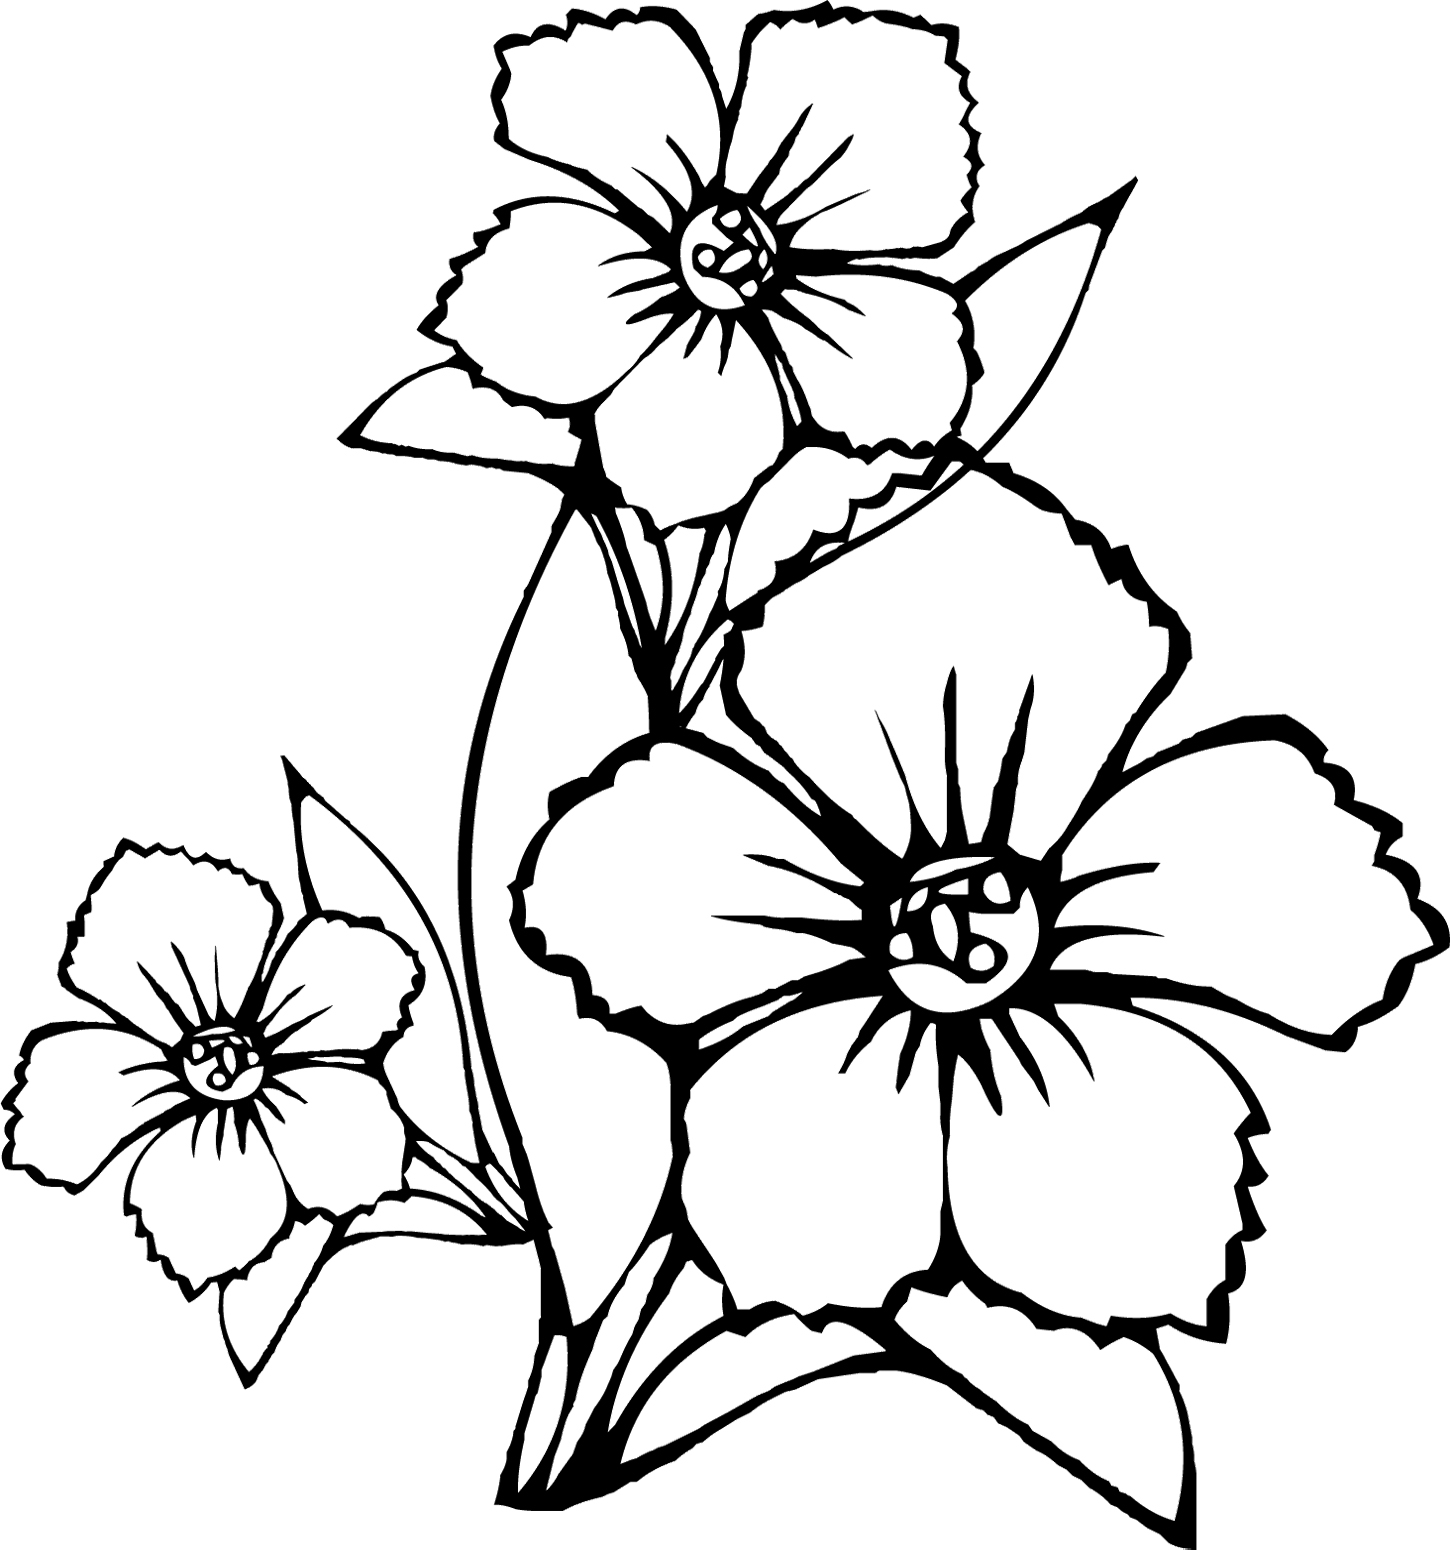 Tropical Flower Coloring Pages - Flower Coloring Pages : Coloring 